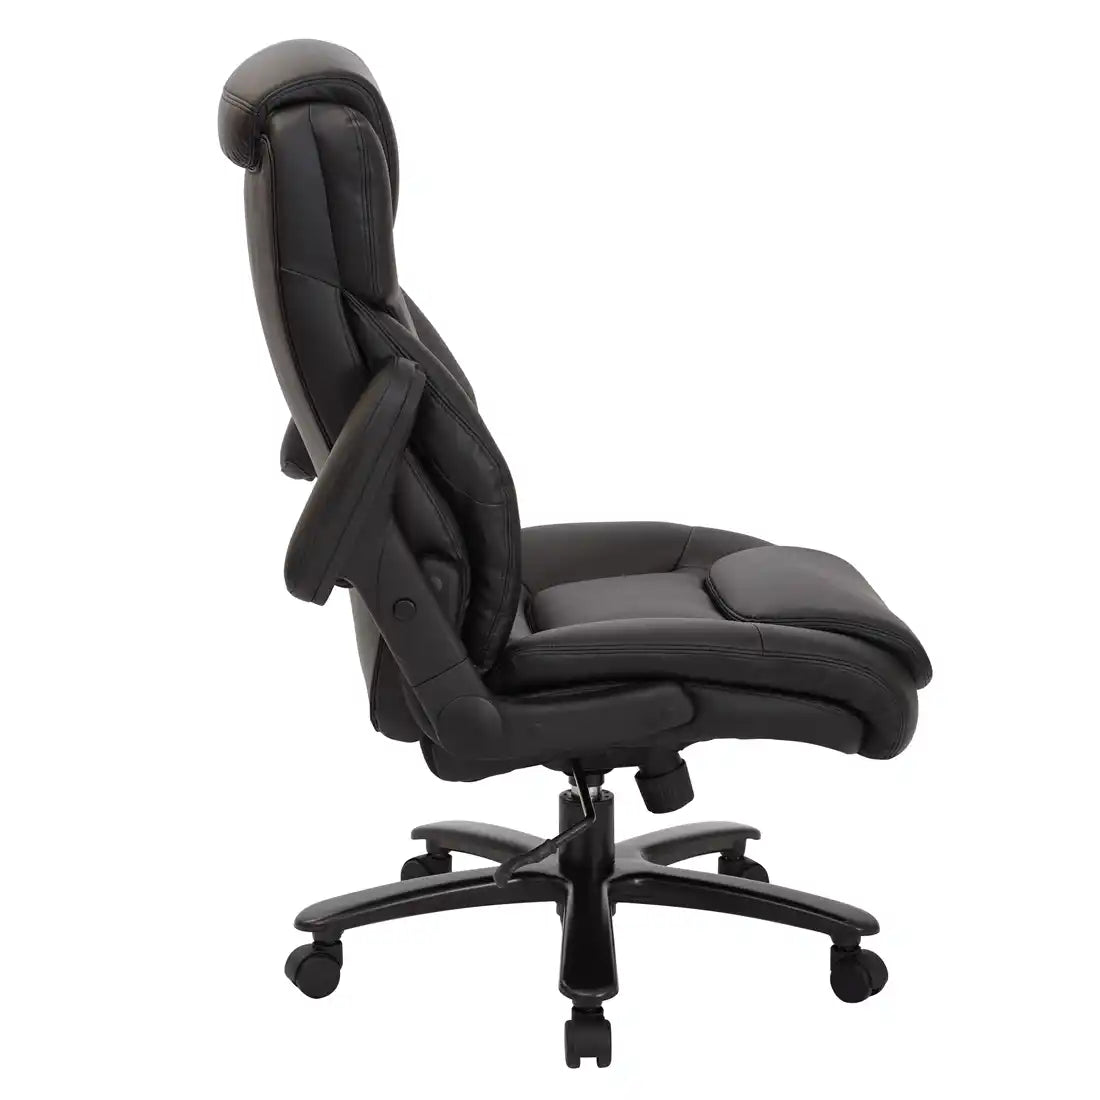 Proline II Big and Tall Deluxe High Back Executive Chair - 39200 - Functional Office Furniture - 39200